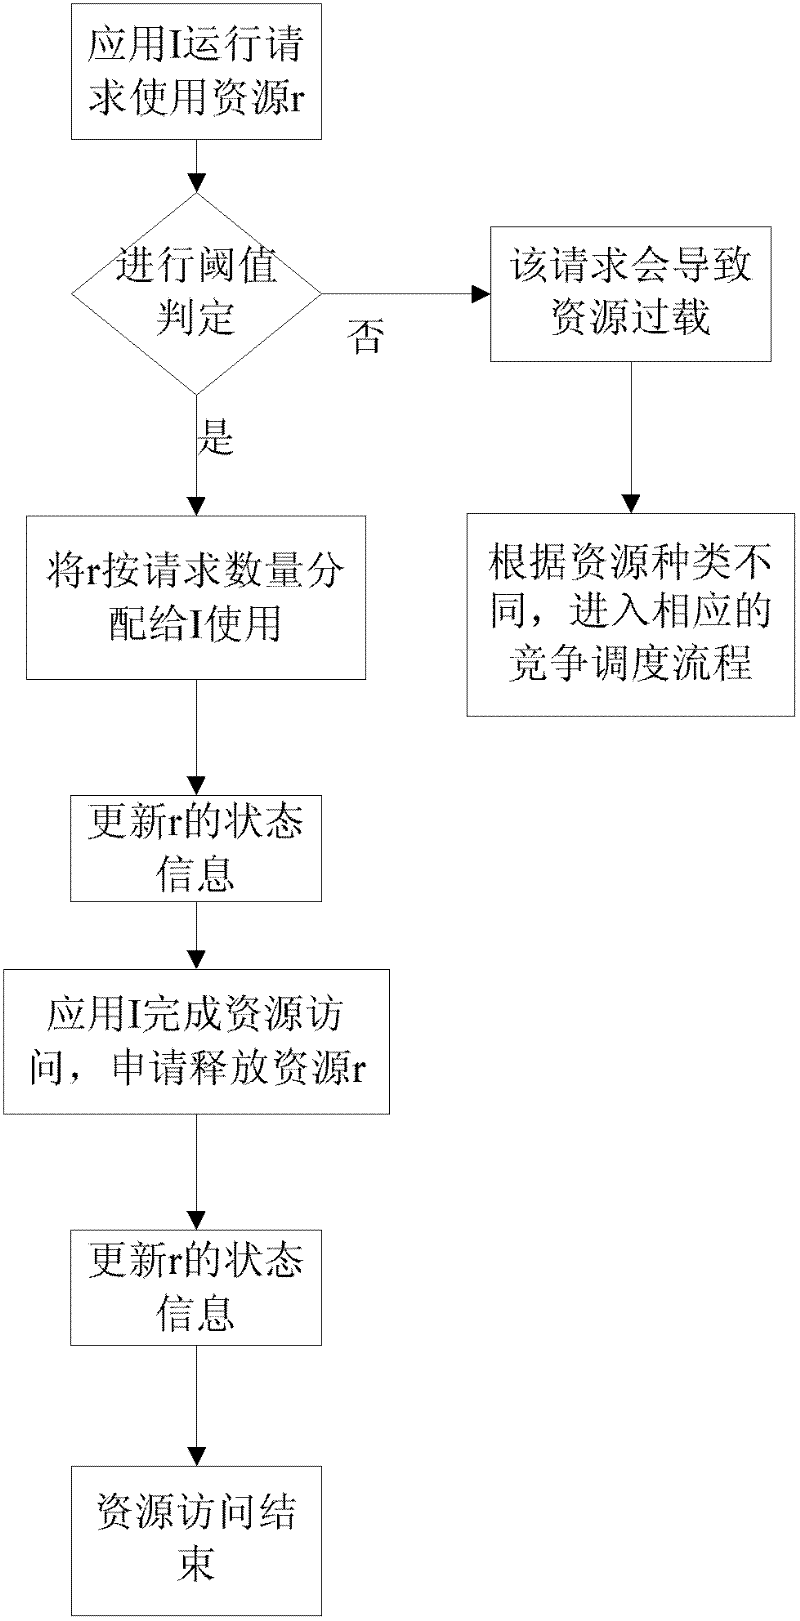 Terminal resource management system for multi-application process embedded system and method